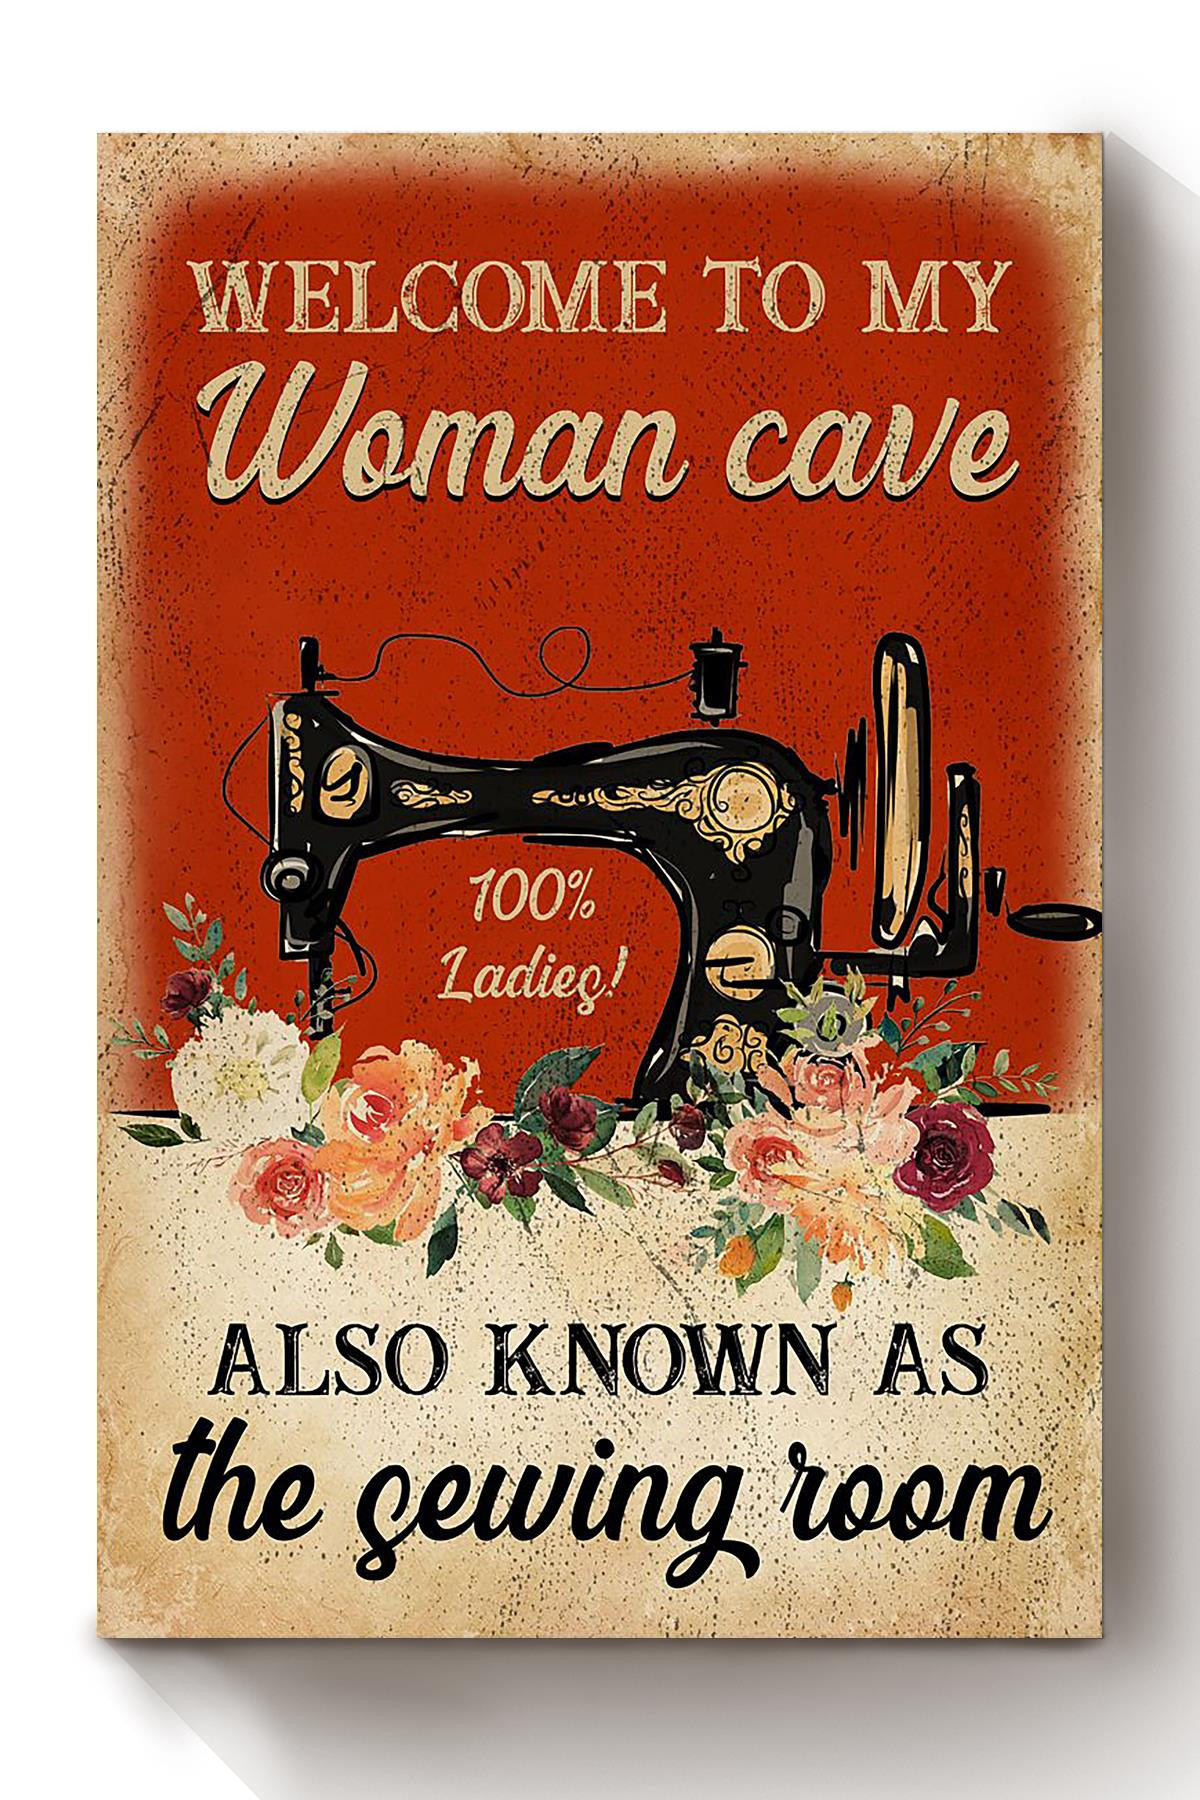 Welcome To My Women Cave Canvas For Quilting Room Decor Canvas Wrapped Canvas 8x10